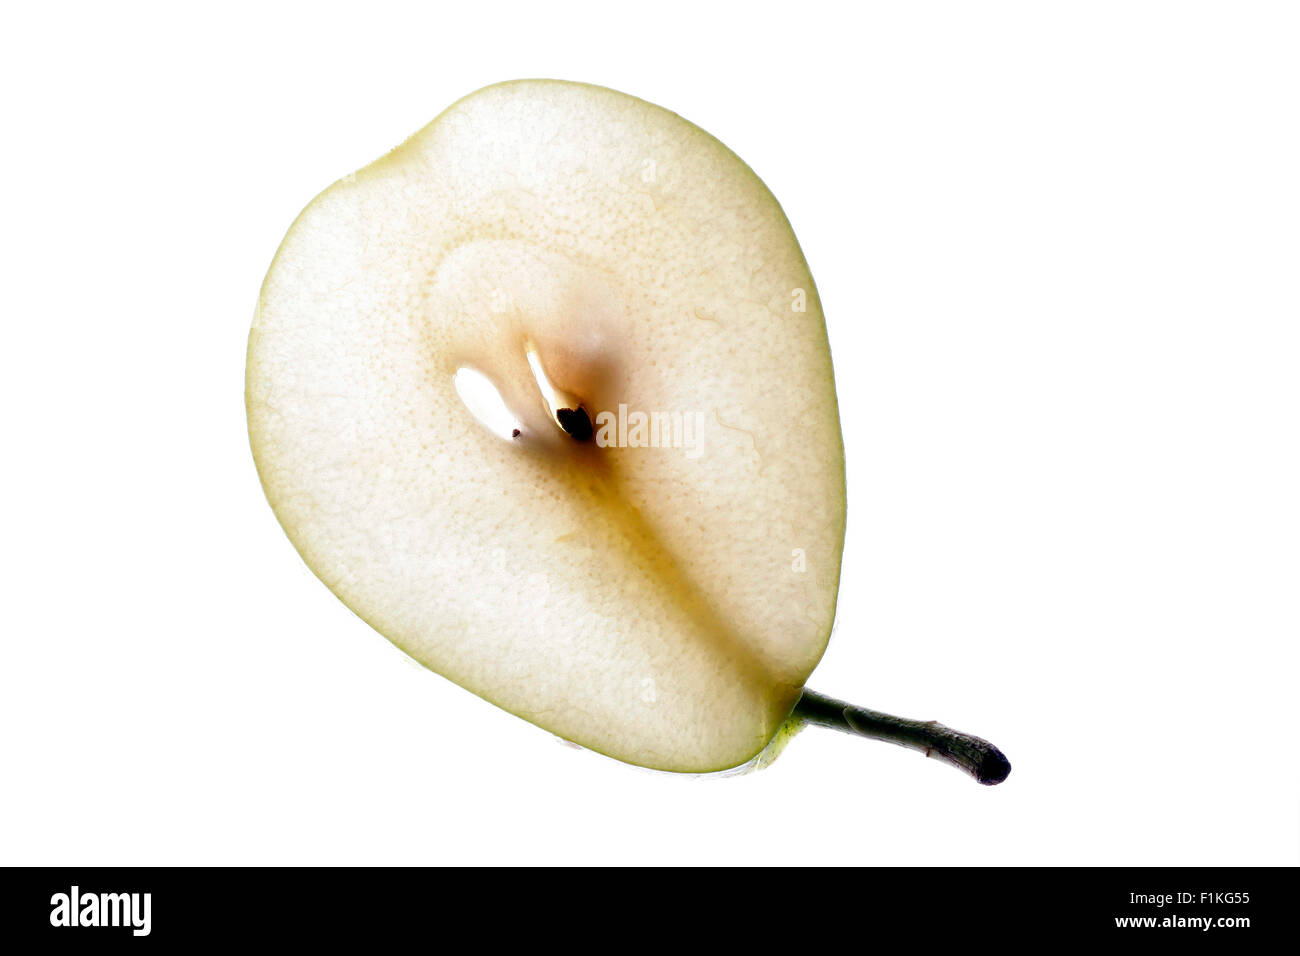 Slice of a pear. Stock Photo